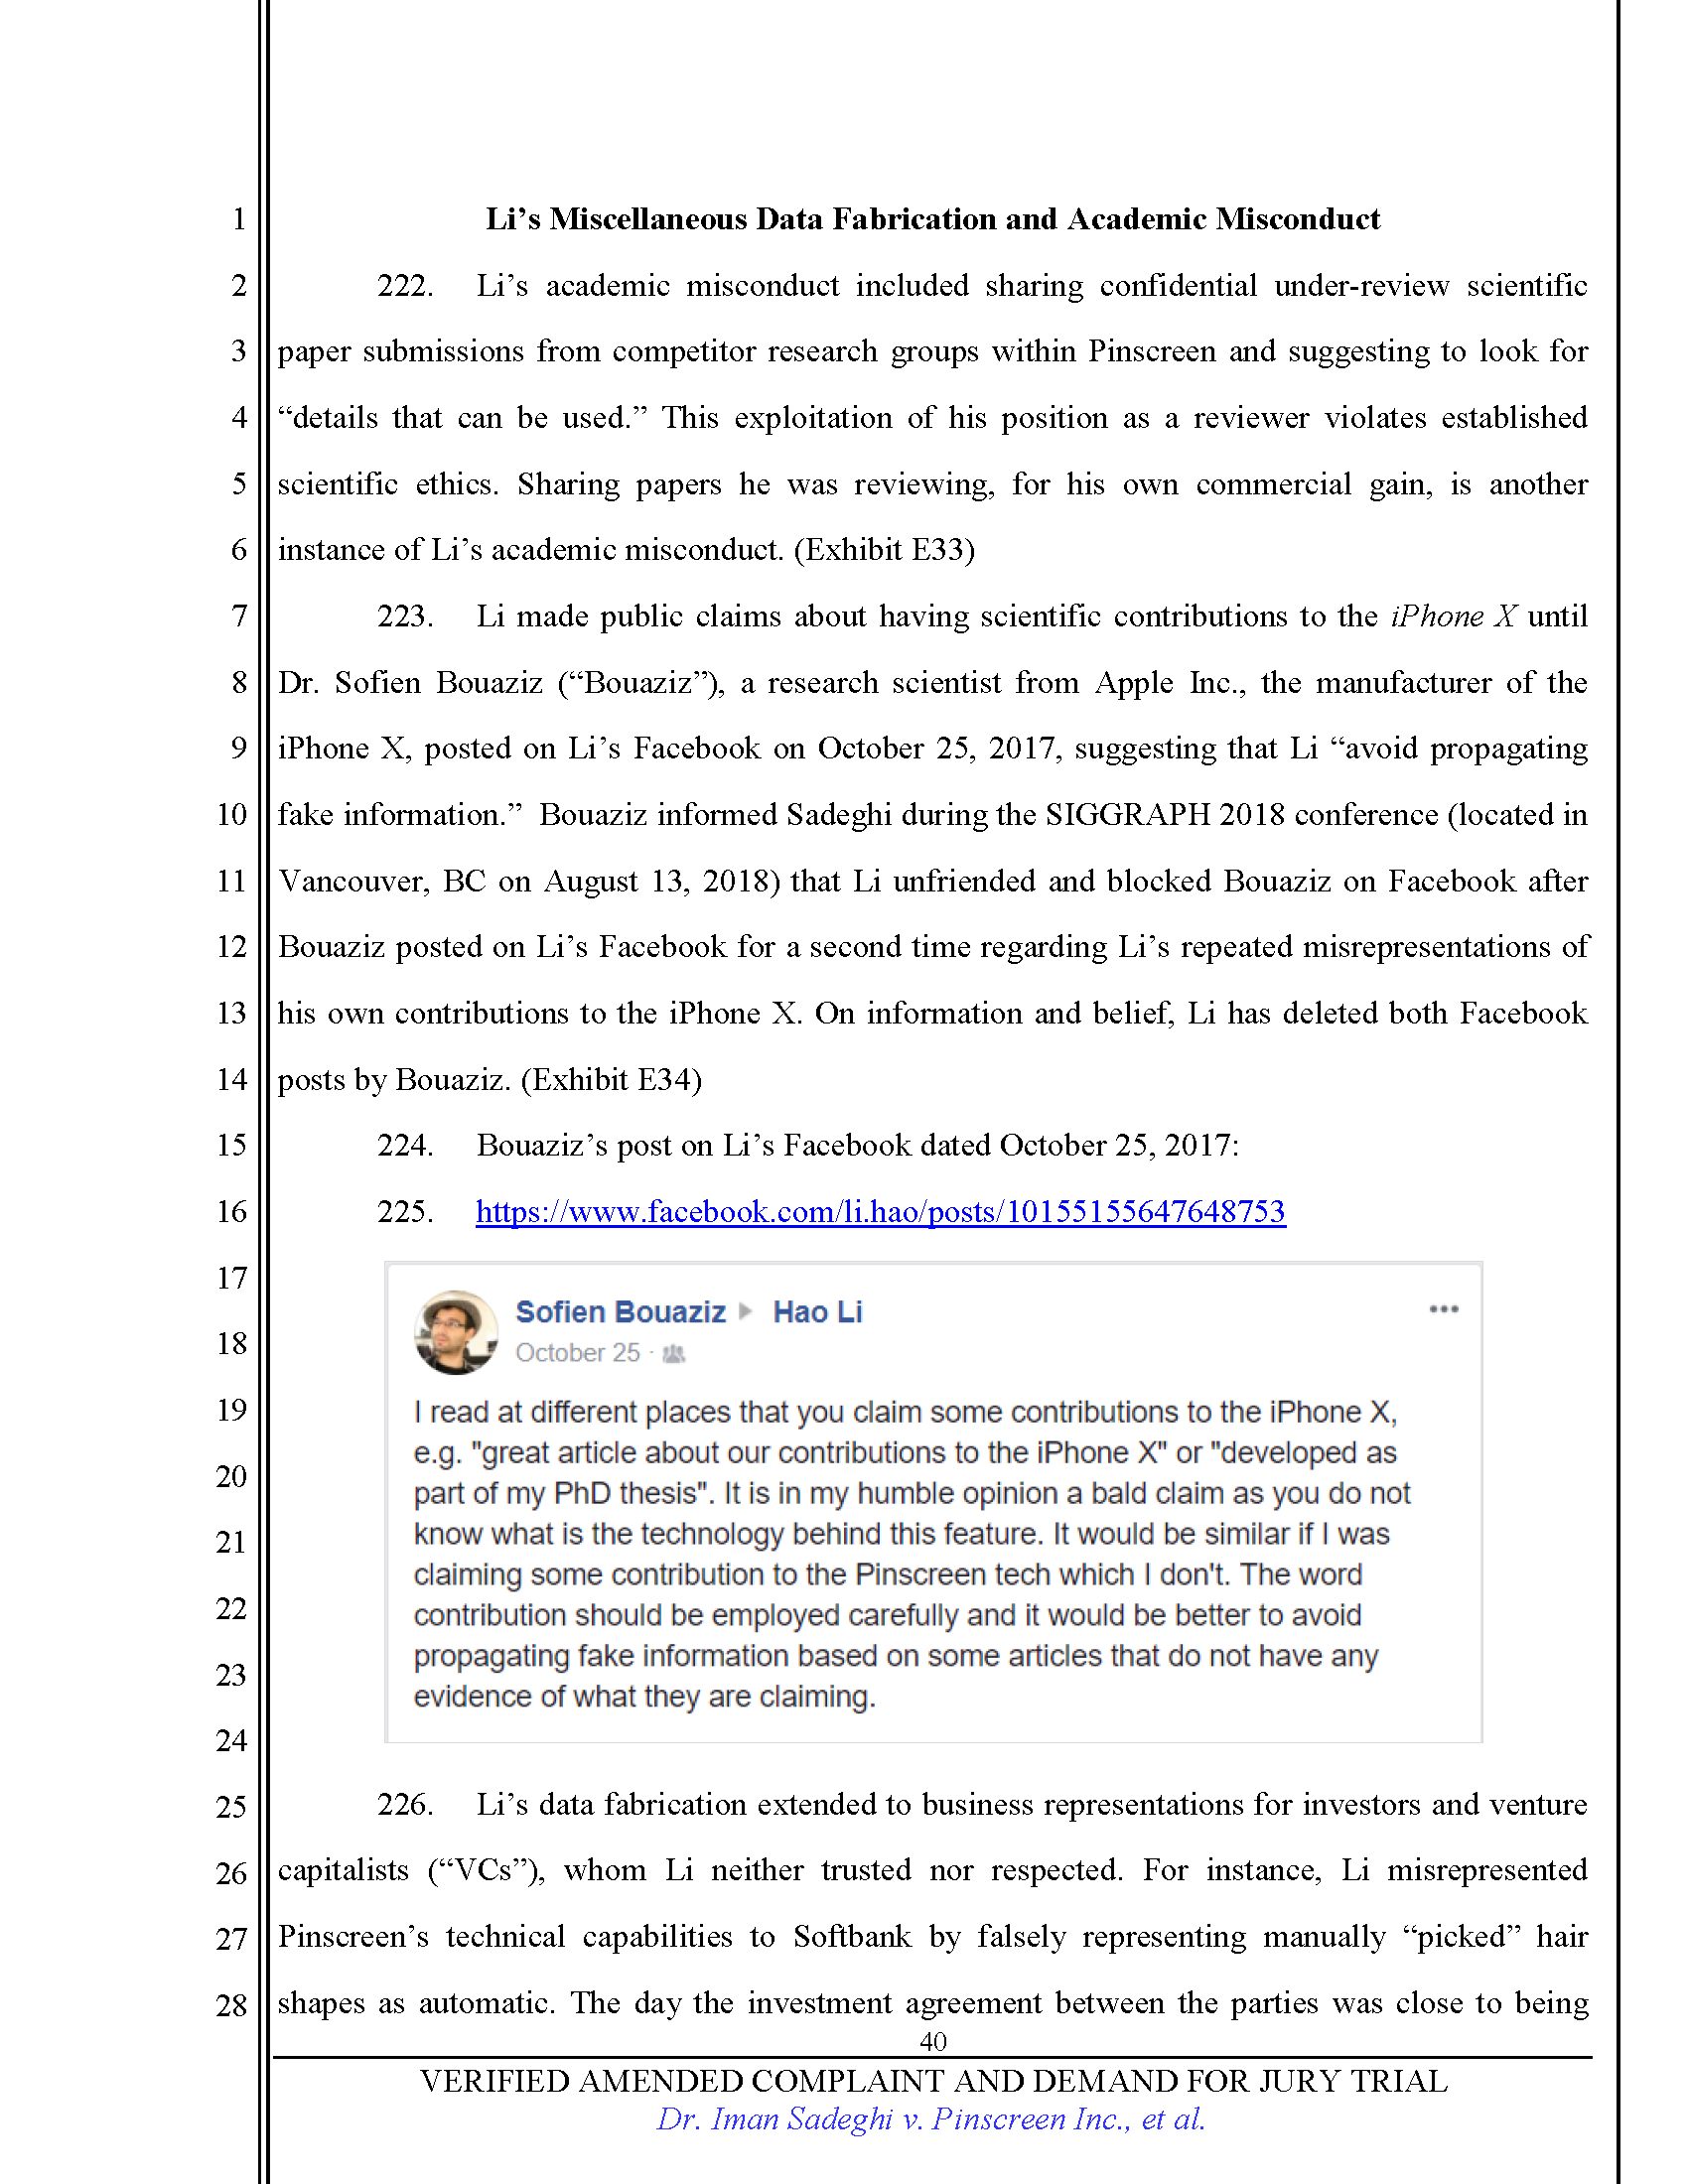 First Amended Complaint (FAC) Page 40